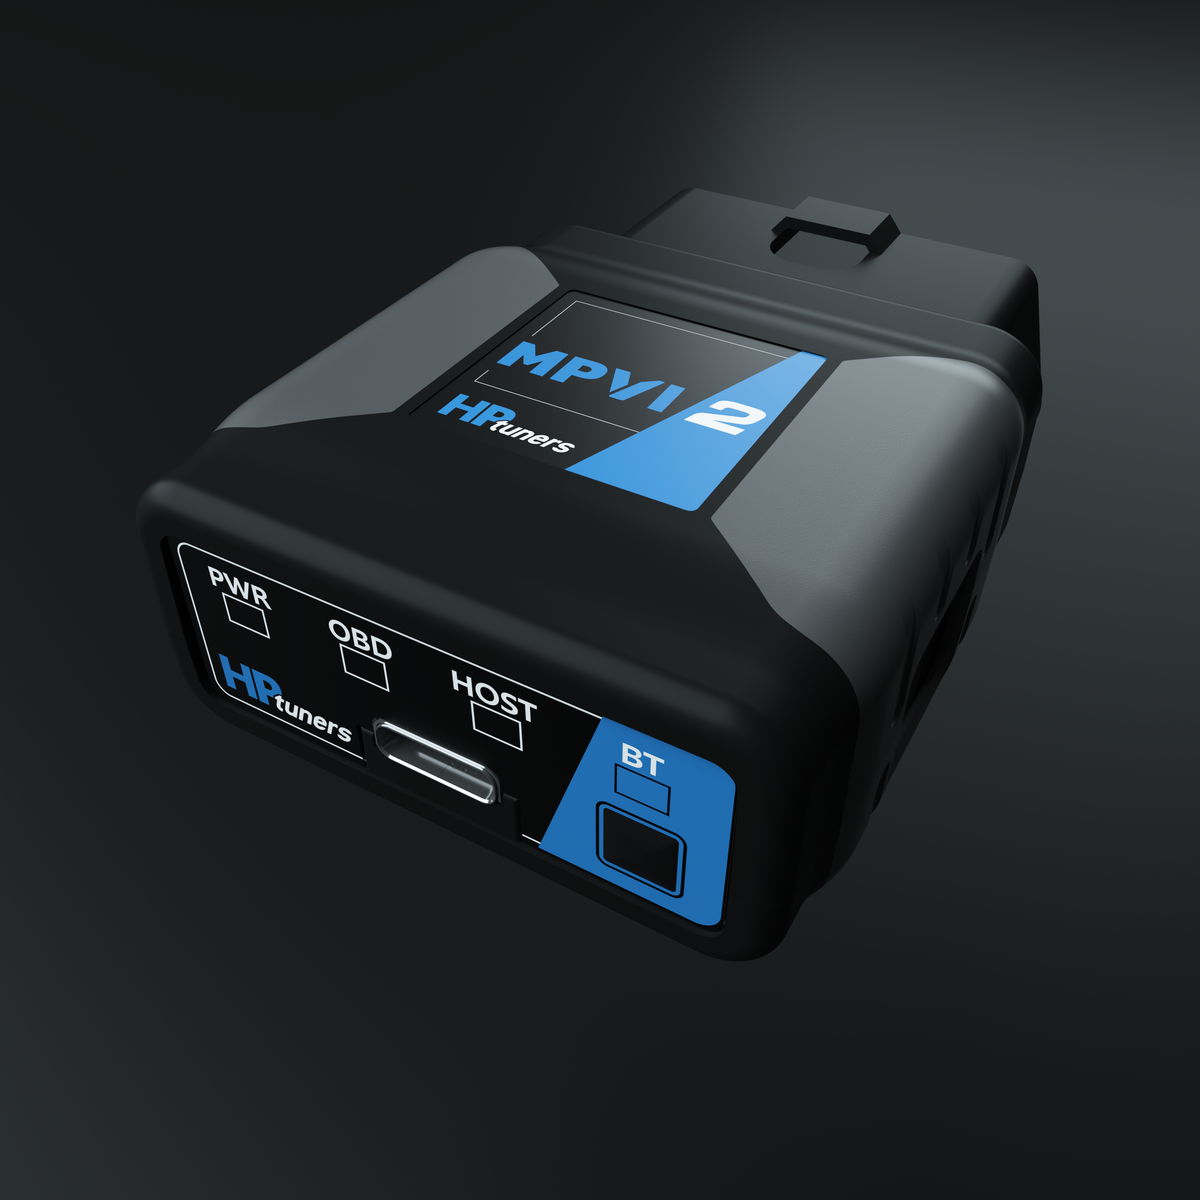 HP Tuners MPVI2 Plus with Pro Link and 4 Credits, the latest generation of hardware from HP Tuners, Replaces VCM Suite